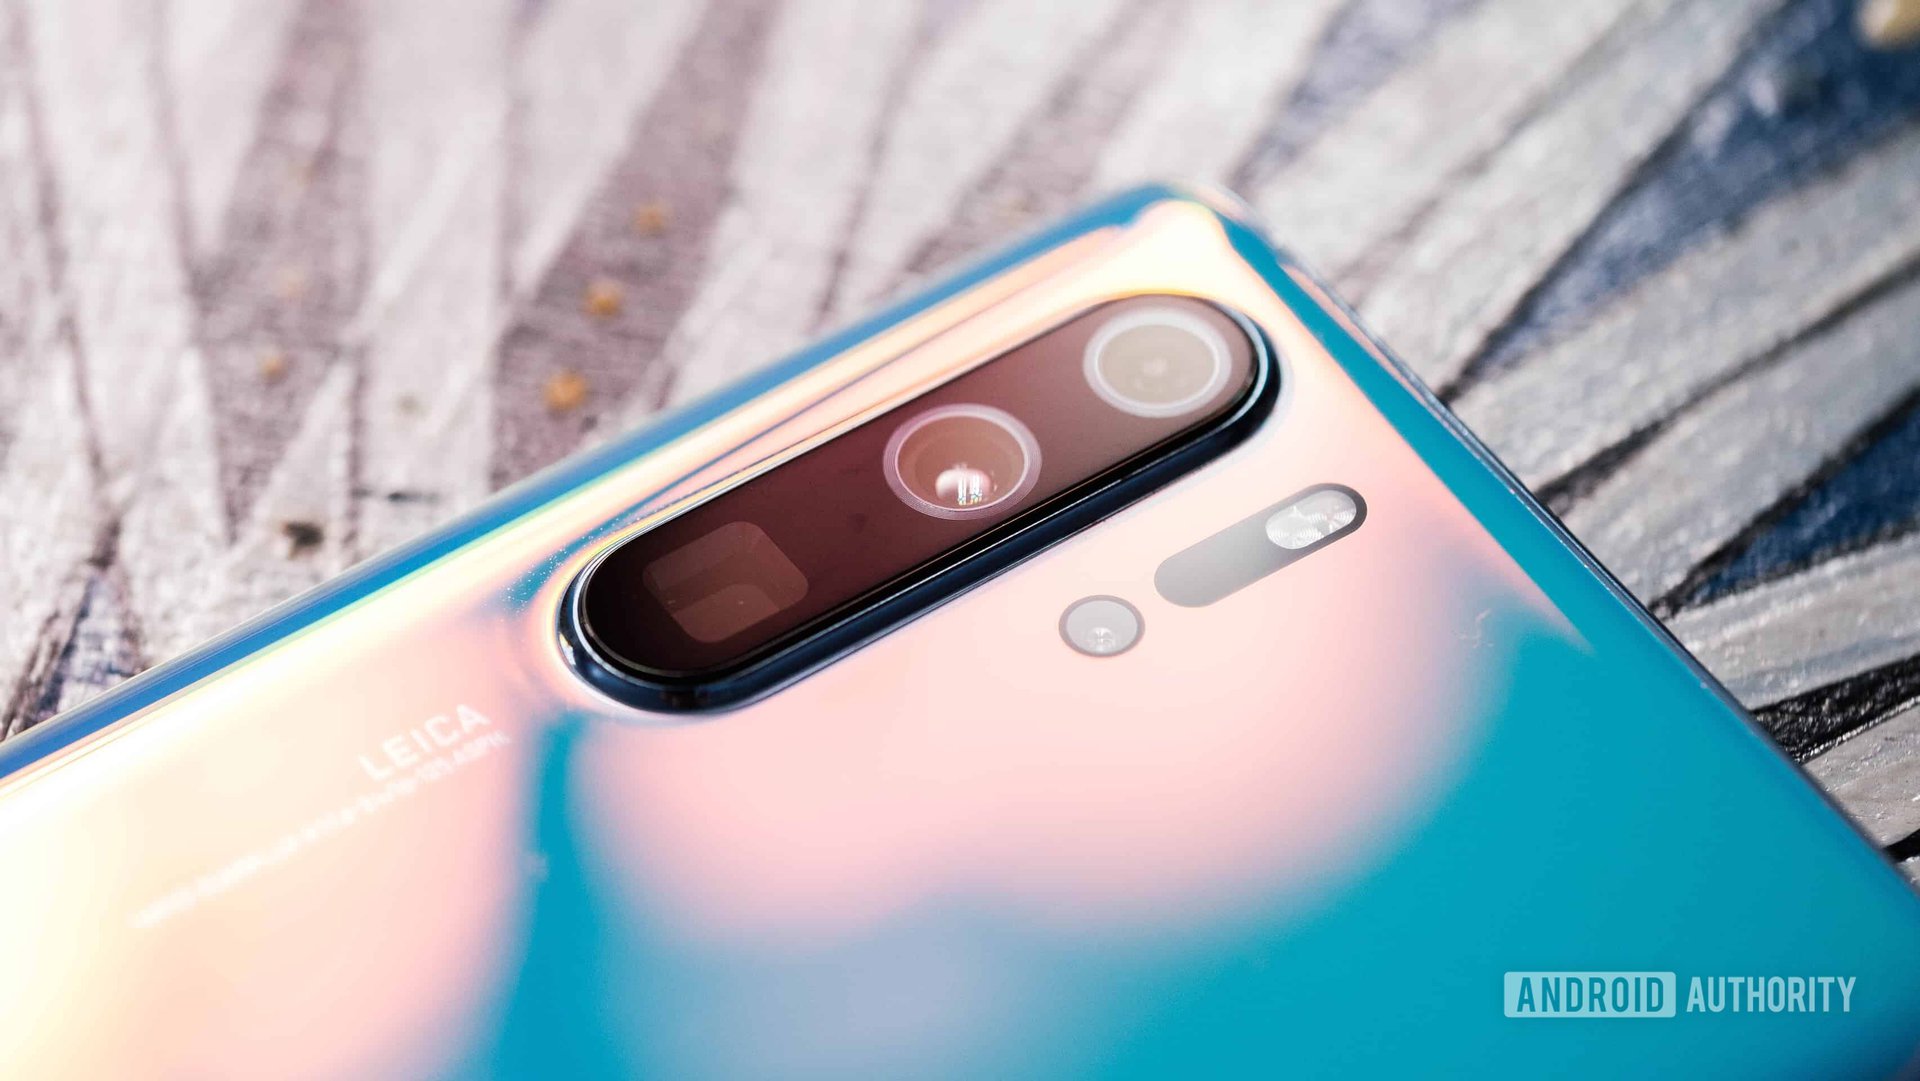 https://www.androidauthority.com/wp-content/uploads/2019/04/Huawei-P30-Pro-camera-array-at-angle.jpg